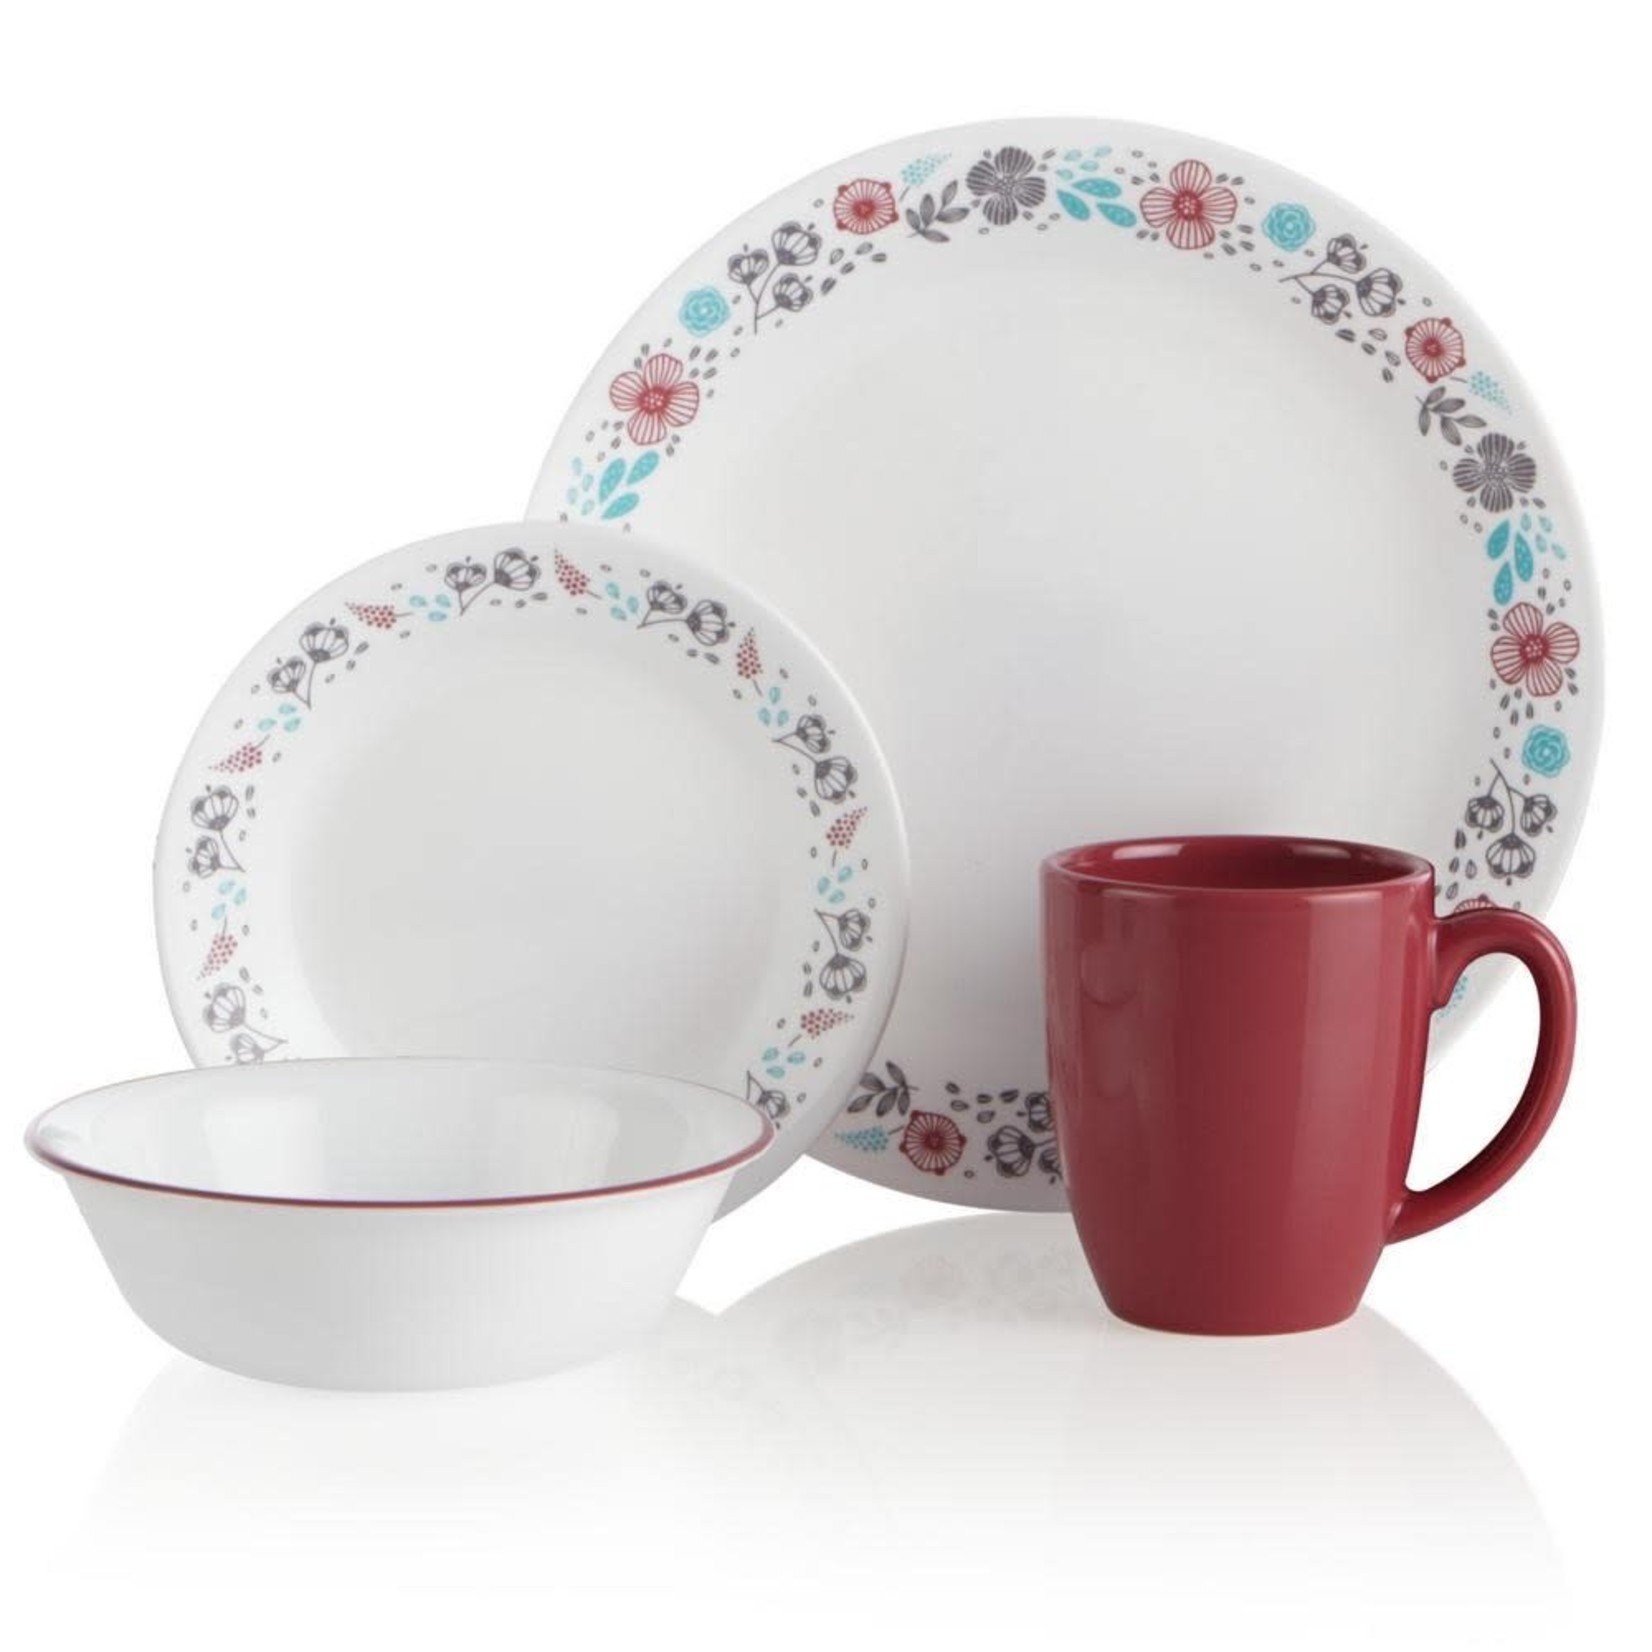 Corelle Nordic Blooms Service For 4